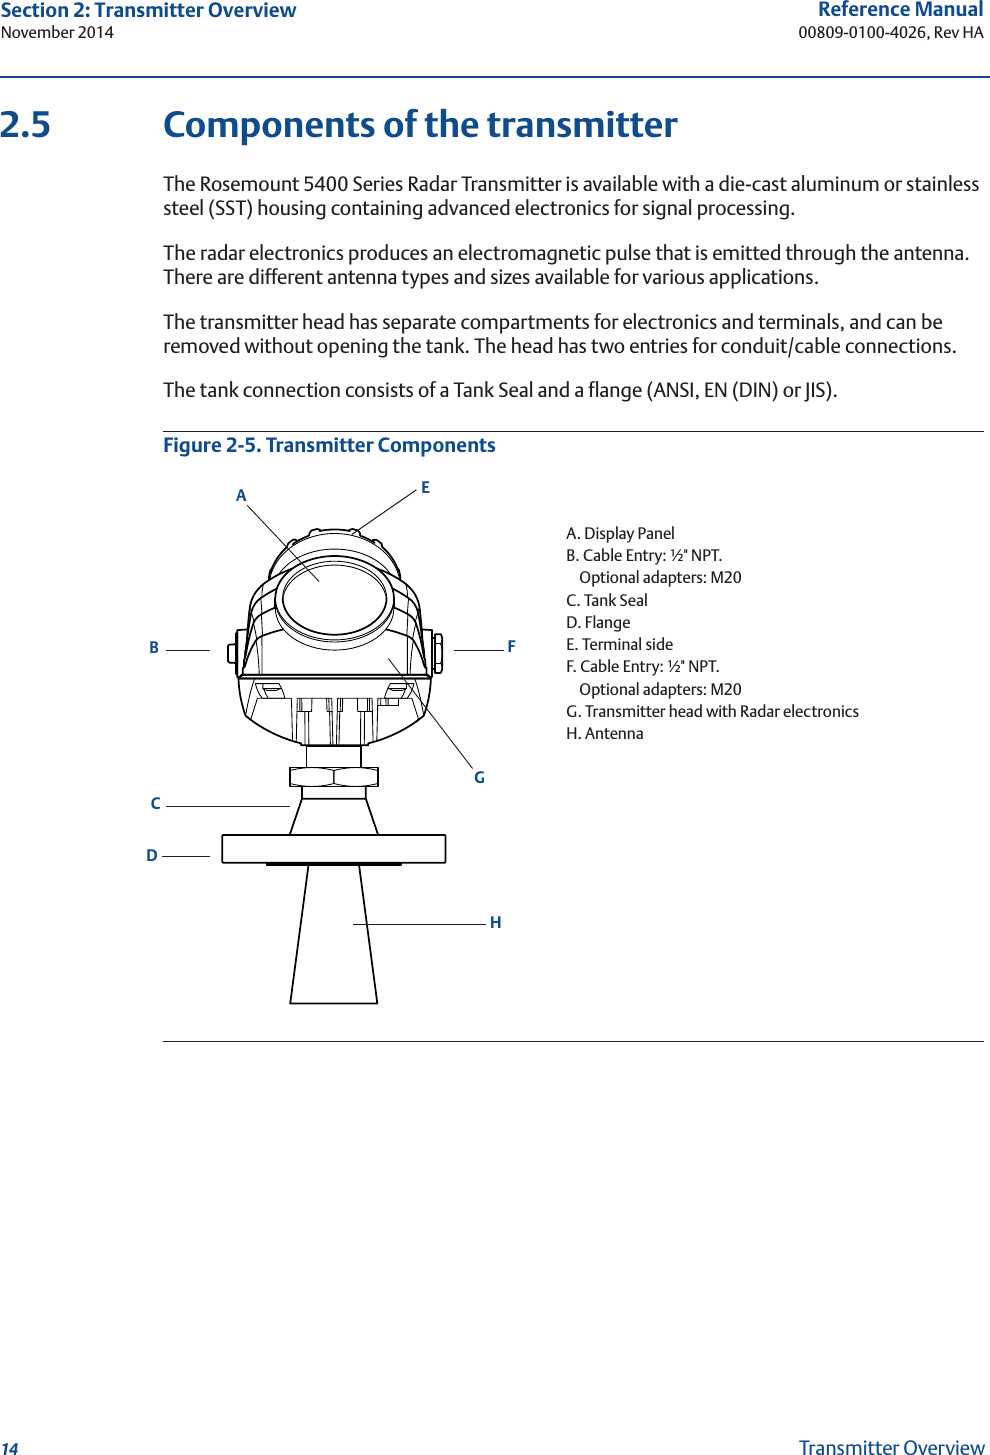 14Reference Manual00809-0100-4026, Rev HASection 2: Transmitter OverviewNovember 2014Transmitter Overview2.5 Components of the transmitterThe Rosemount 5400 Series Radar Transmitter is available with a die-cast aluminum or stainless steel (SST) housing containing advanced electronics for signal processing. The radar electronics produces an electromagnetic pulse that is emitted through the antenna. There are different antenna types and sizes available for various applications. The transmitter head has separate compartments for electronics and terminals, and can be removed without opening the tank. The head has two entries for conduit/cable connections.The tank connection consists of a Tank Seal and a flange (ANSI, EN (DIN) or JIS).Figure 2-5. Transmitter ComponentsBGHAEFDCA. Display PanelB. Cable Entry: ½&quot; NPT.Optional adapters: M20C. Tank SealD. FlangeE. Terminal sideF. Cable Entry: ½&quot; NPT.Optional adapters: M20G. Transmitter head with Radar electronicsH. Antenna